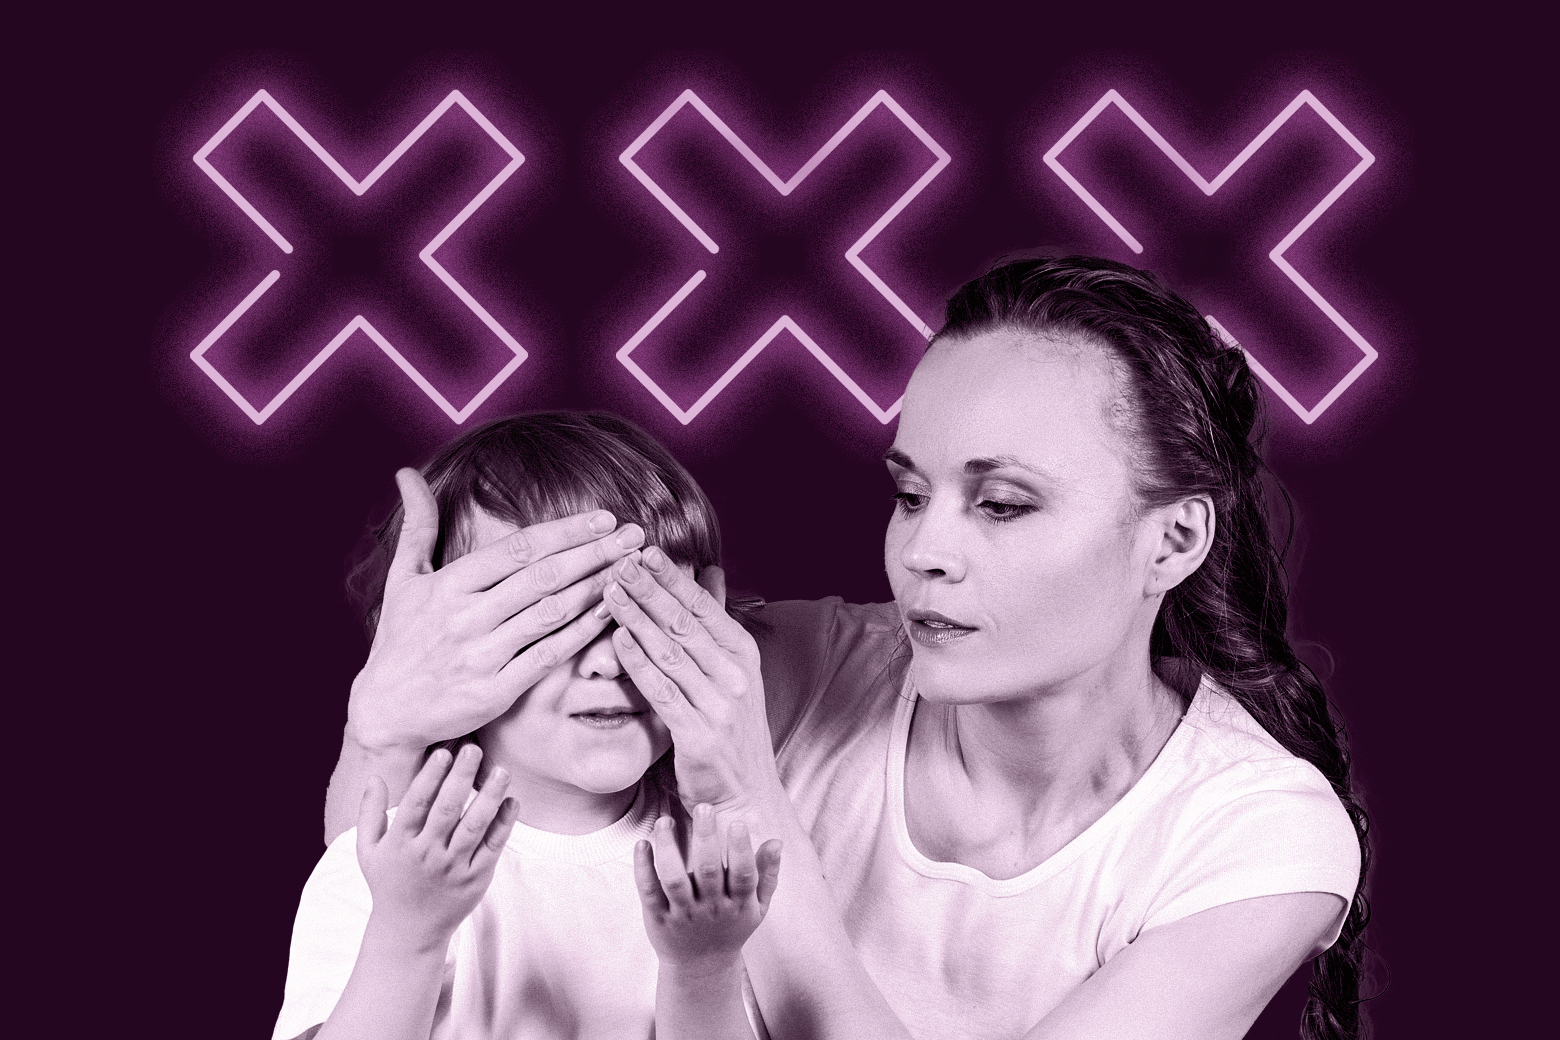 Porn addiction signs My husband has none of them, so why do I care that he watches hq nude photo